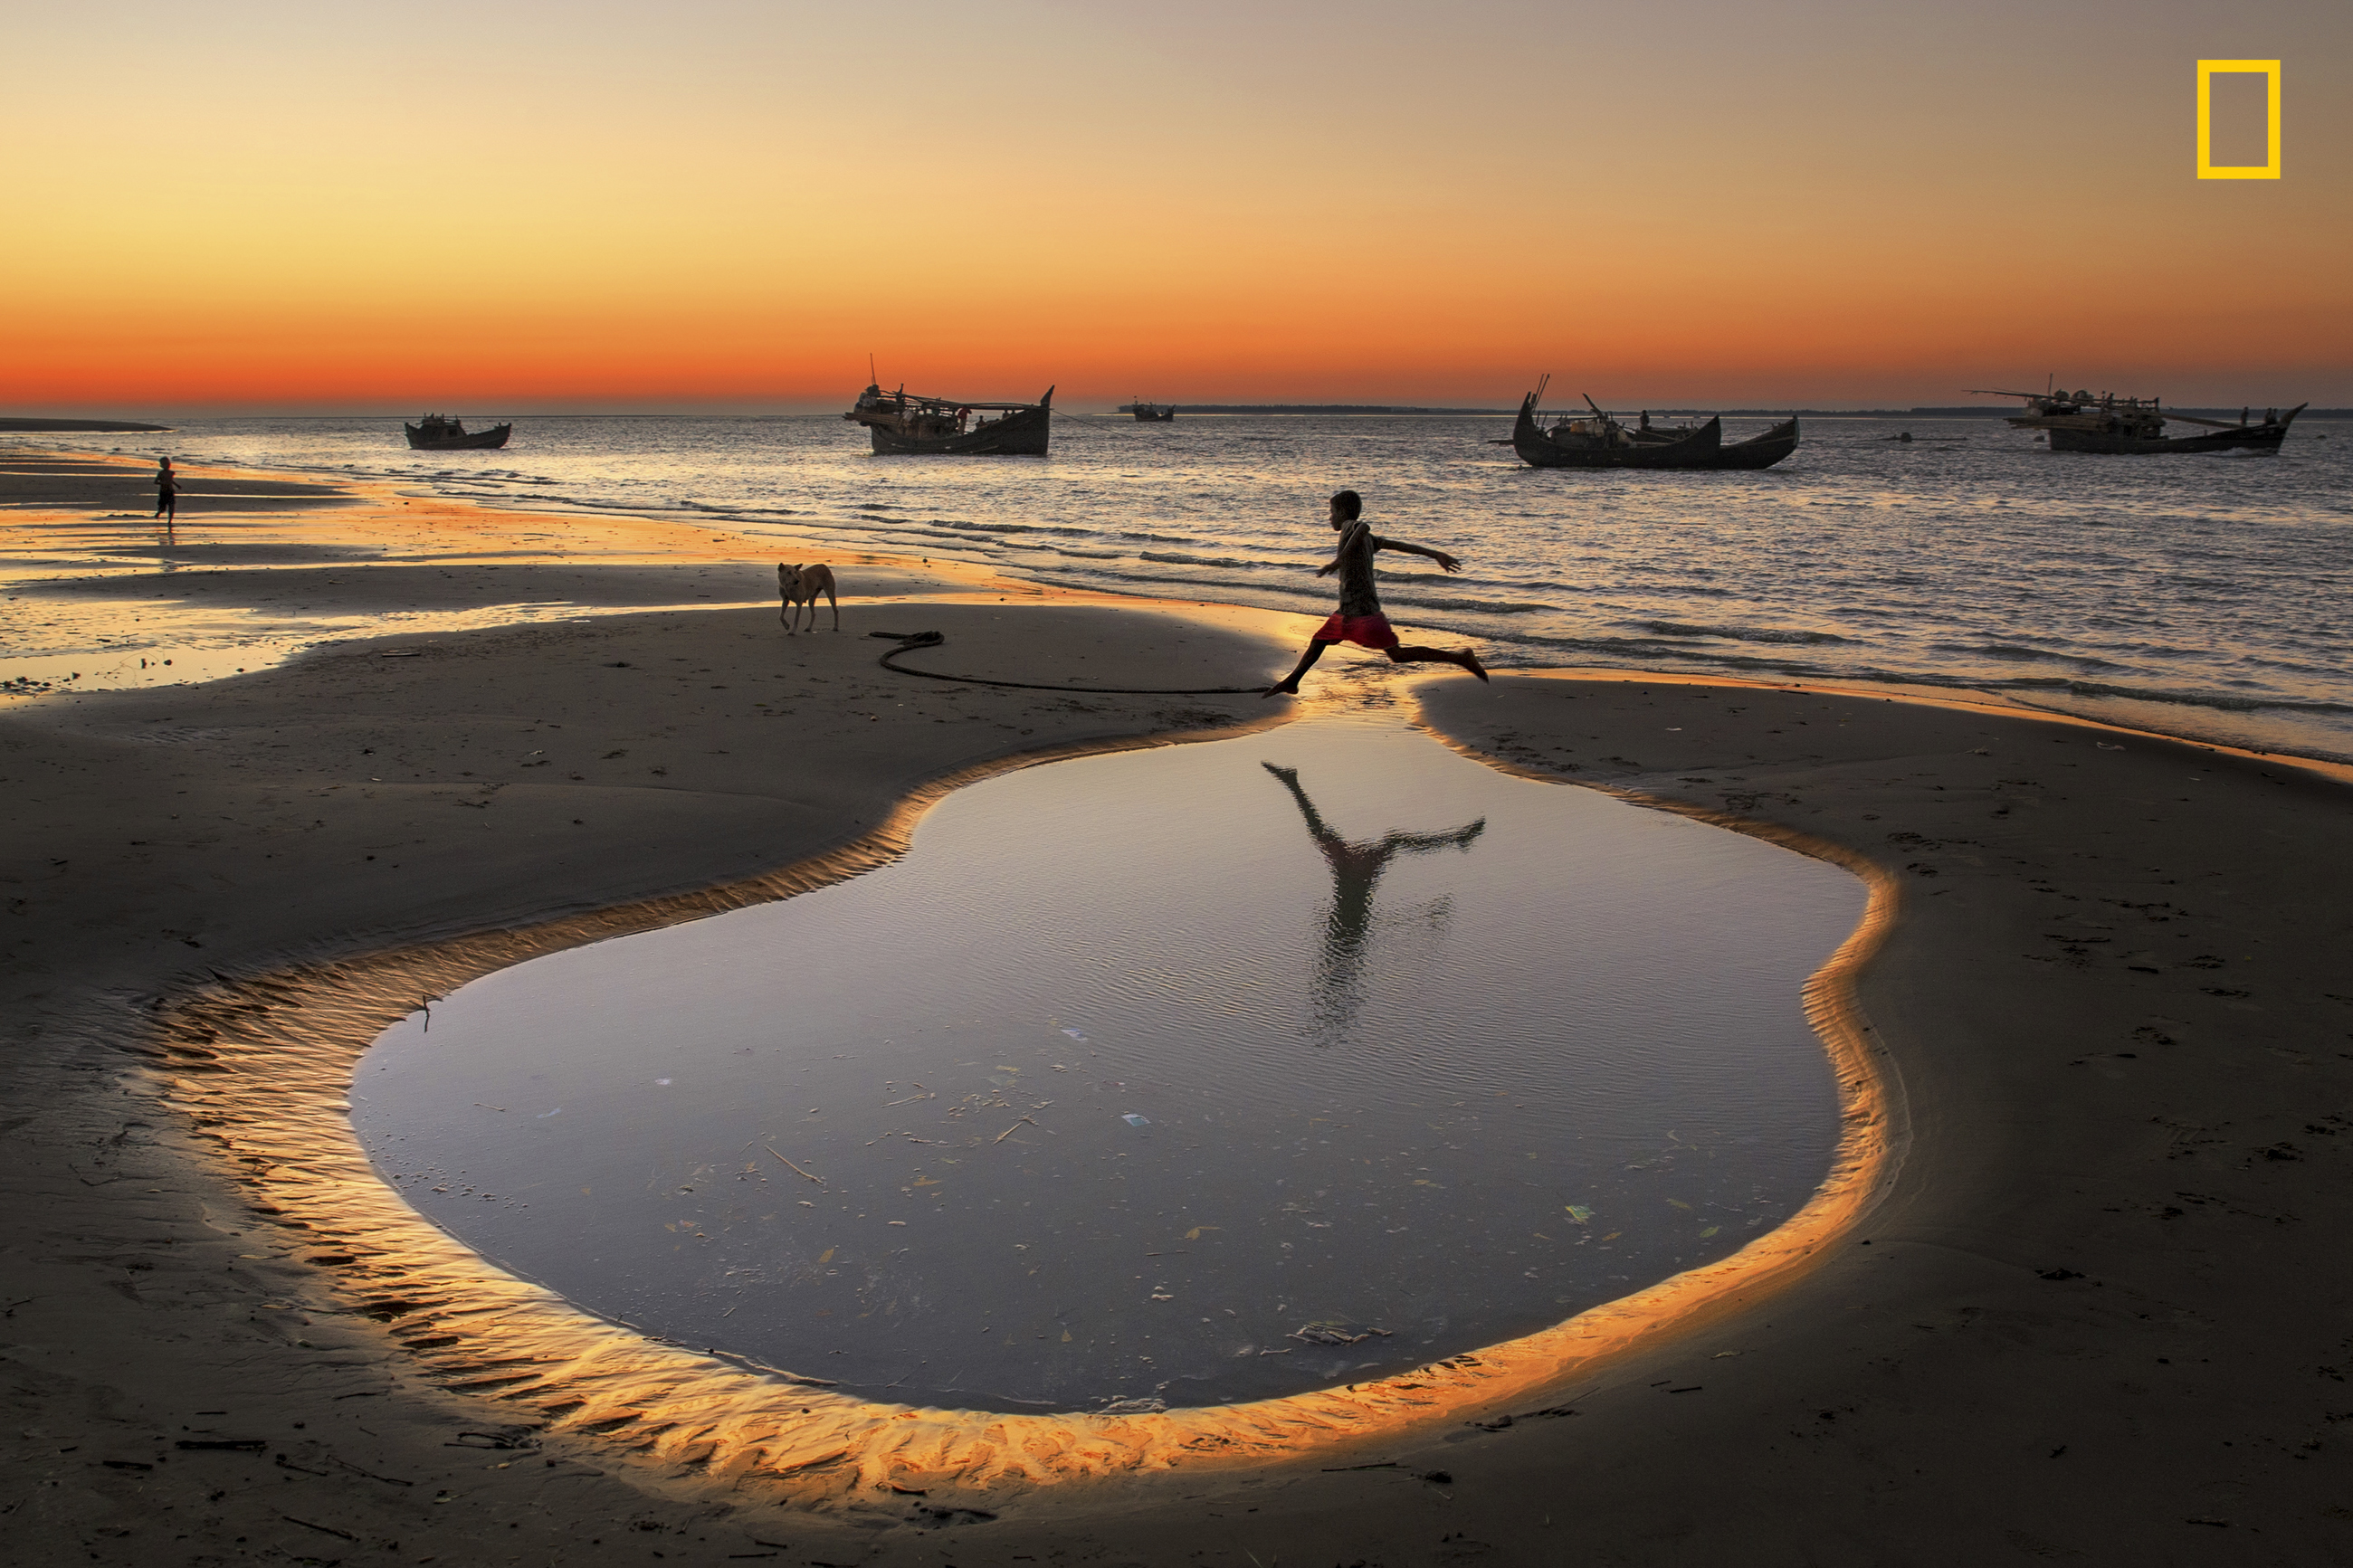 National Geographic Logo Nature Landscape Sea Water Boat Children Jumping Reflection Sand Dog Sunset 2600x1733